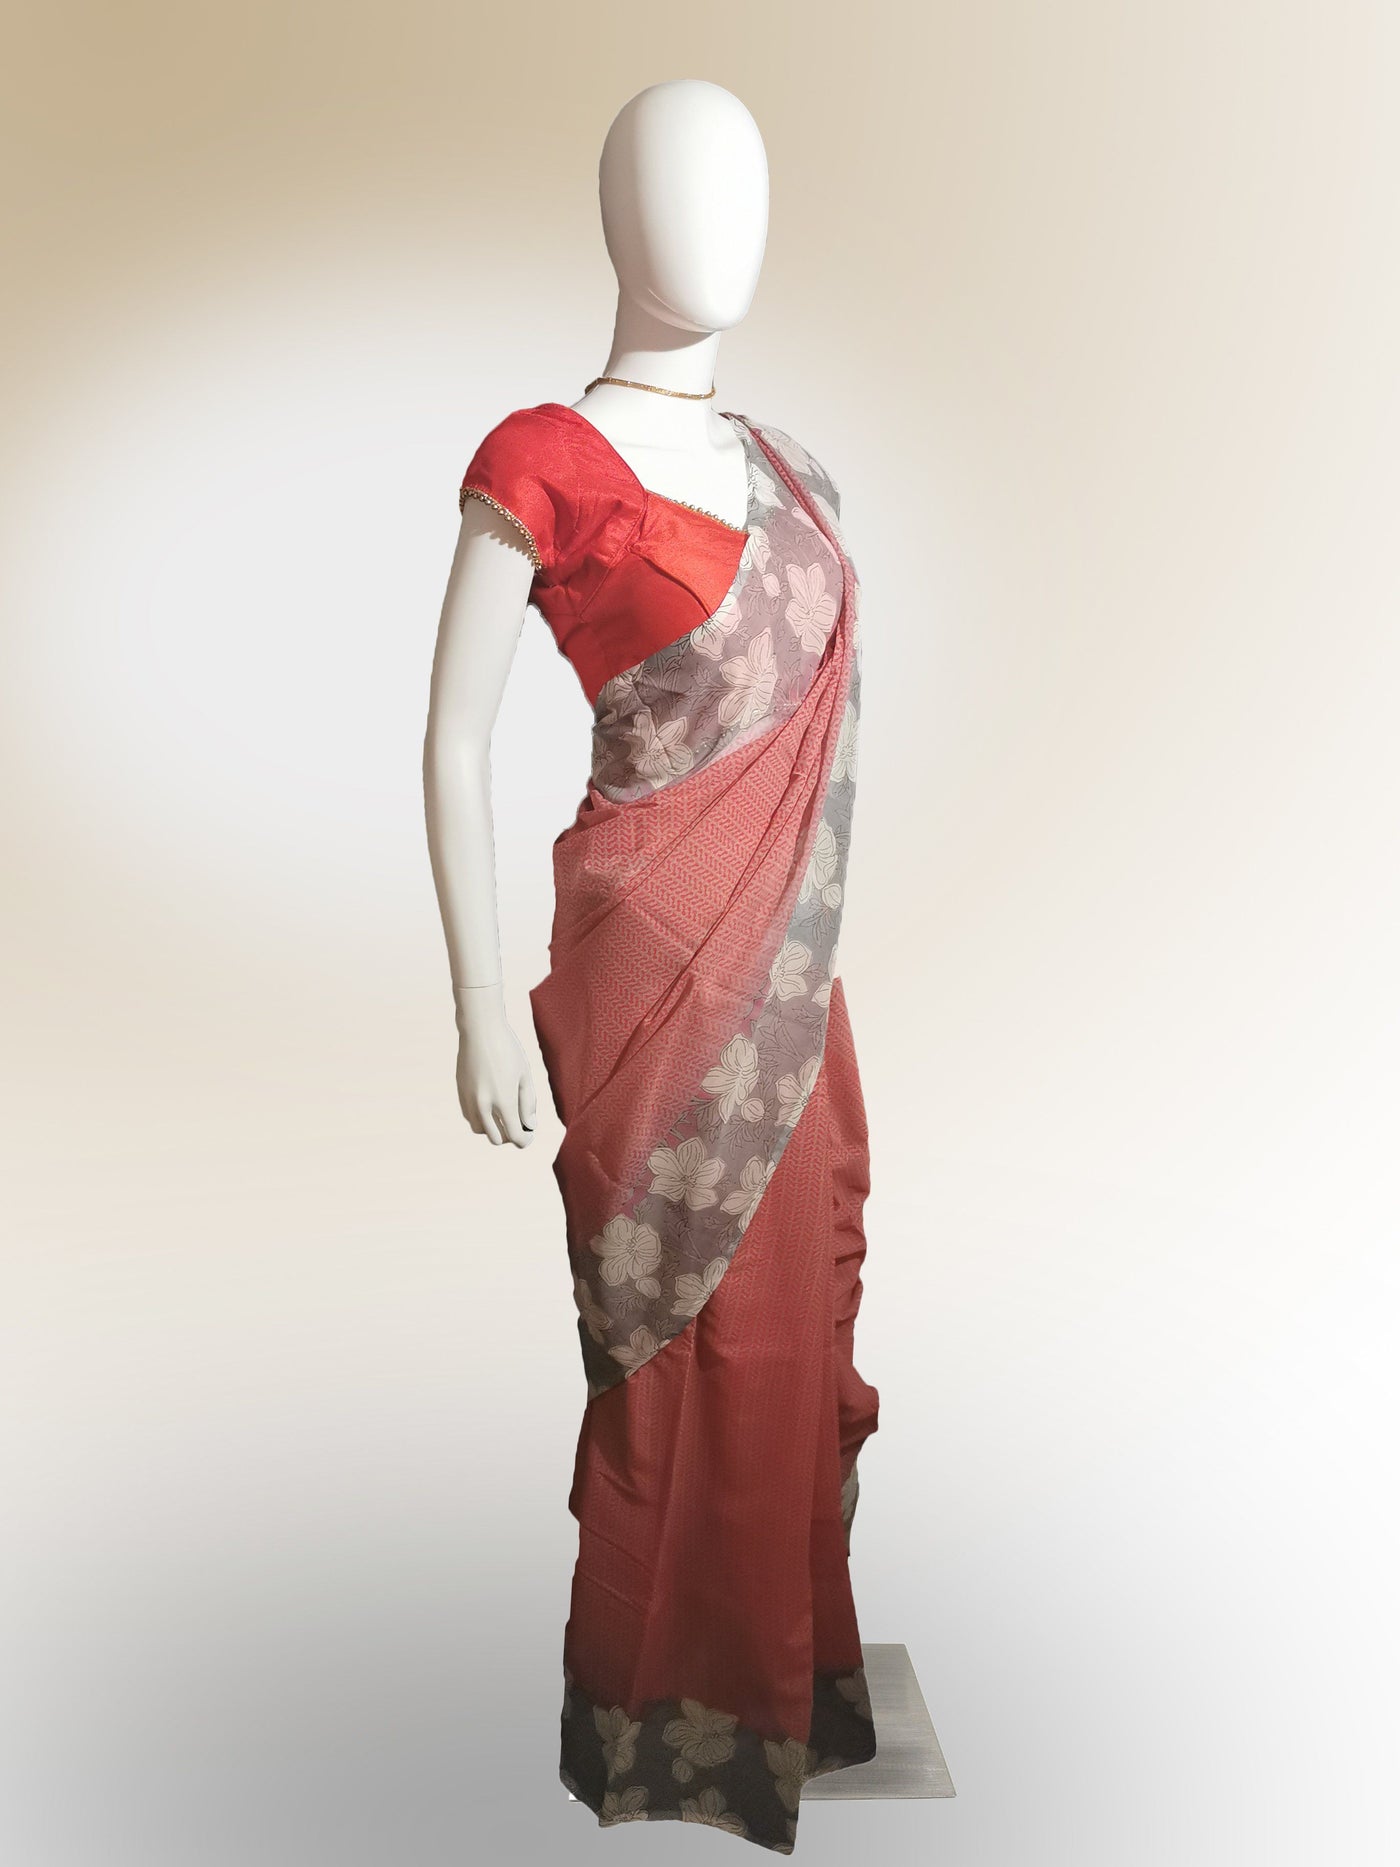 Saree in Soft Red with Gray Floral Print Along Border Indian Clothing in Denver, CO, Aurora, CO, Boulder, CO, Fort Collins, CO, Colorado Springs, CO, Parker, CO, Highlands Ranch, CO, Cherry Creek, CO, Centennial, CO, and Longmont, CO. NATIONWIDE SHIPPING USA- India Fashion X